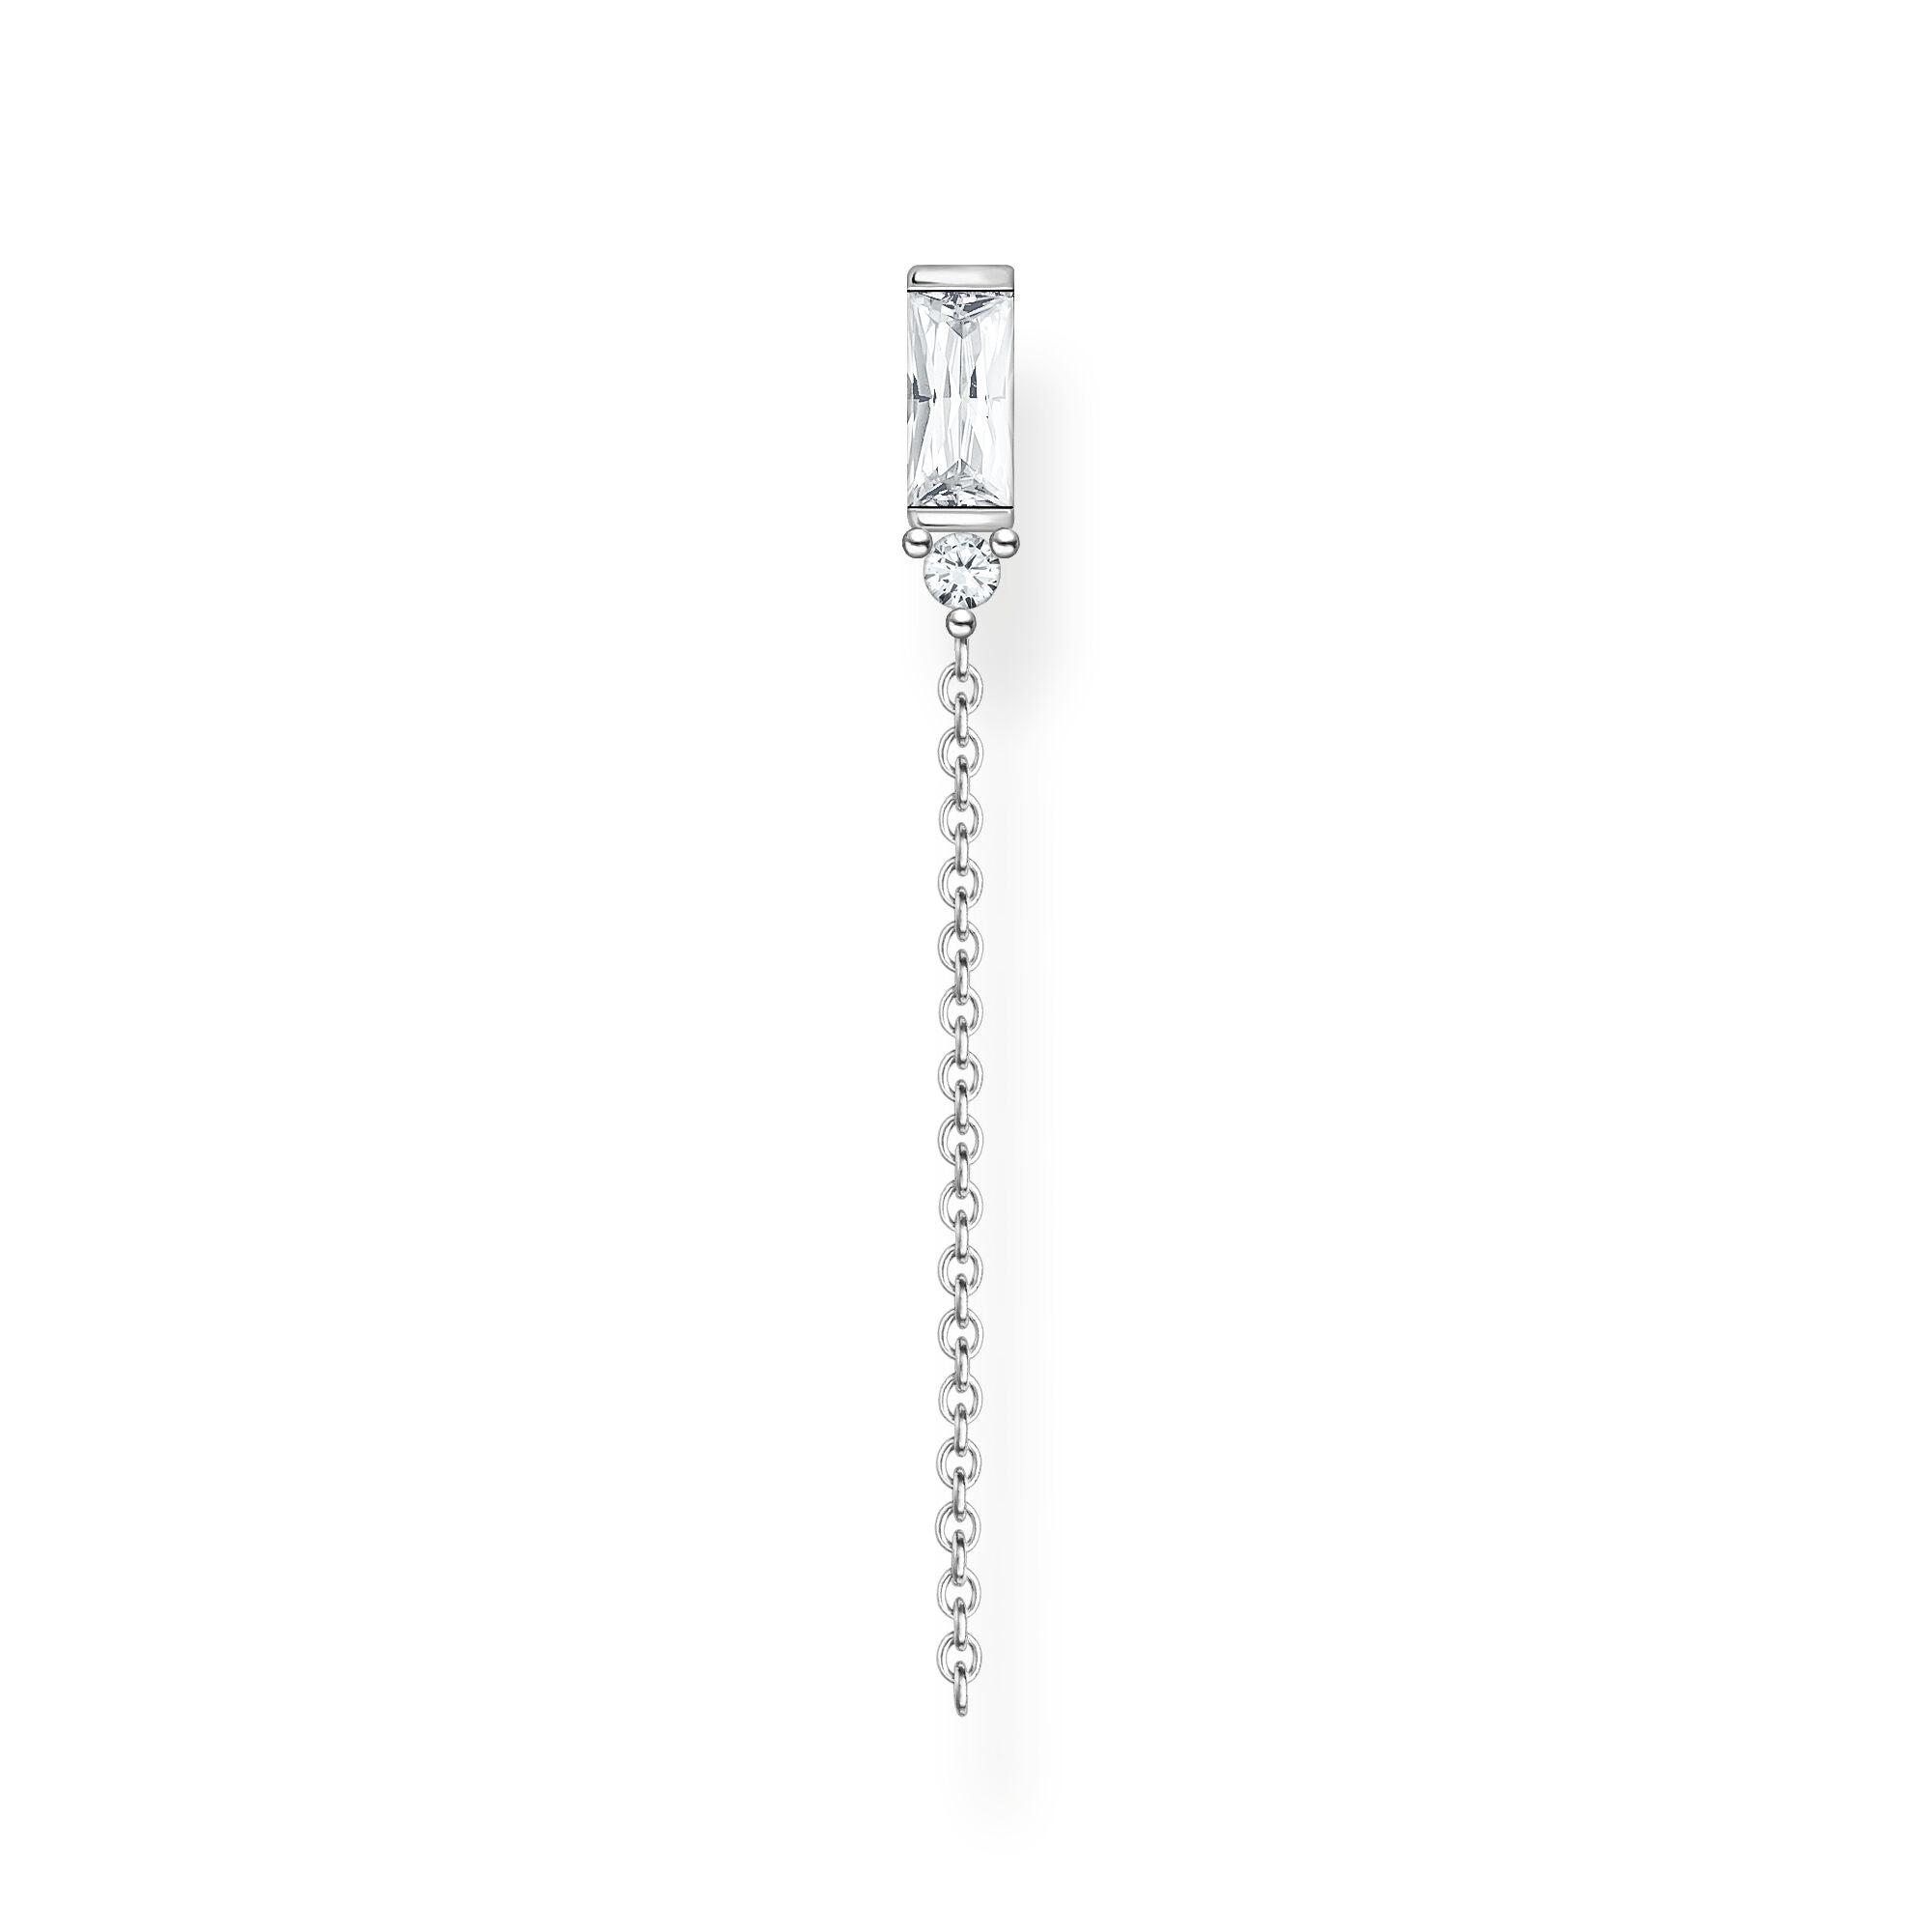 Thomas Sabo sterling silver baguette cz and chain dangle single earring